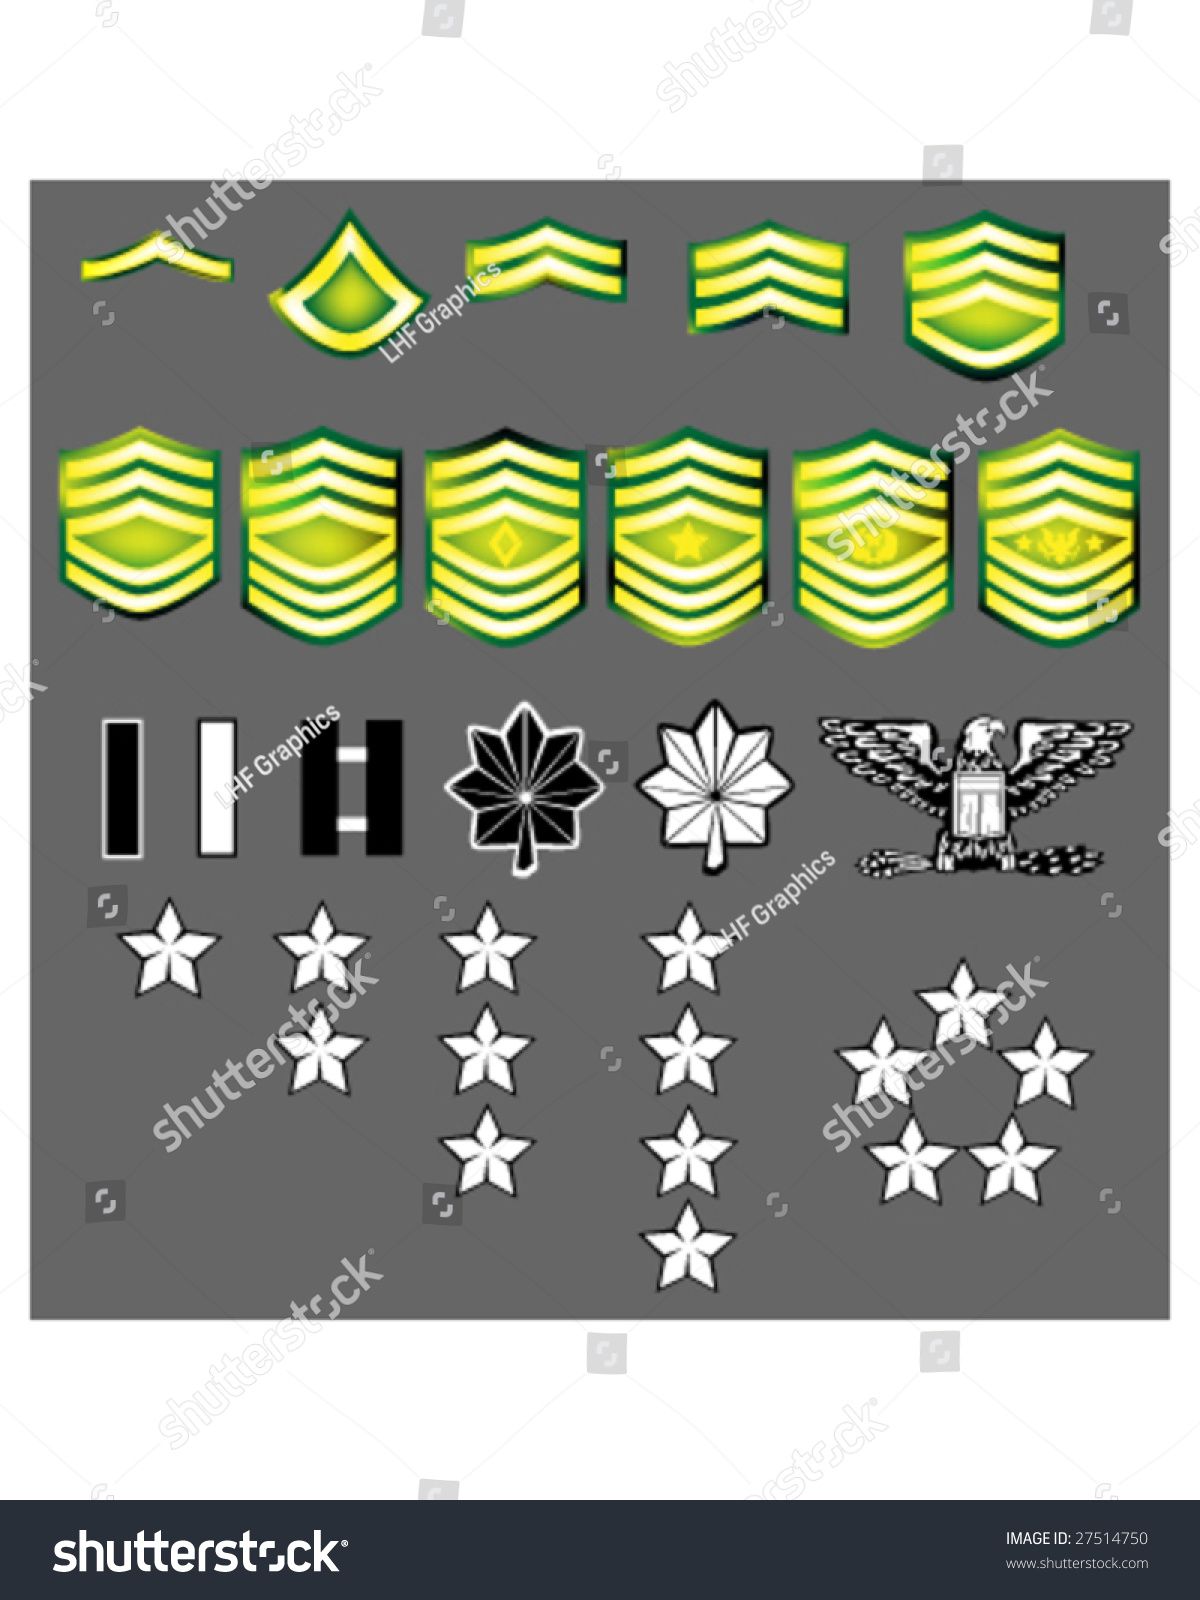 Army us and rank insignia Army Ranks